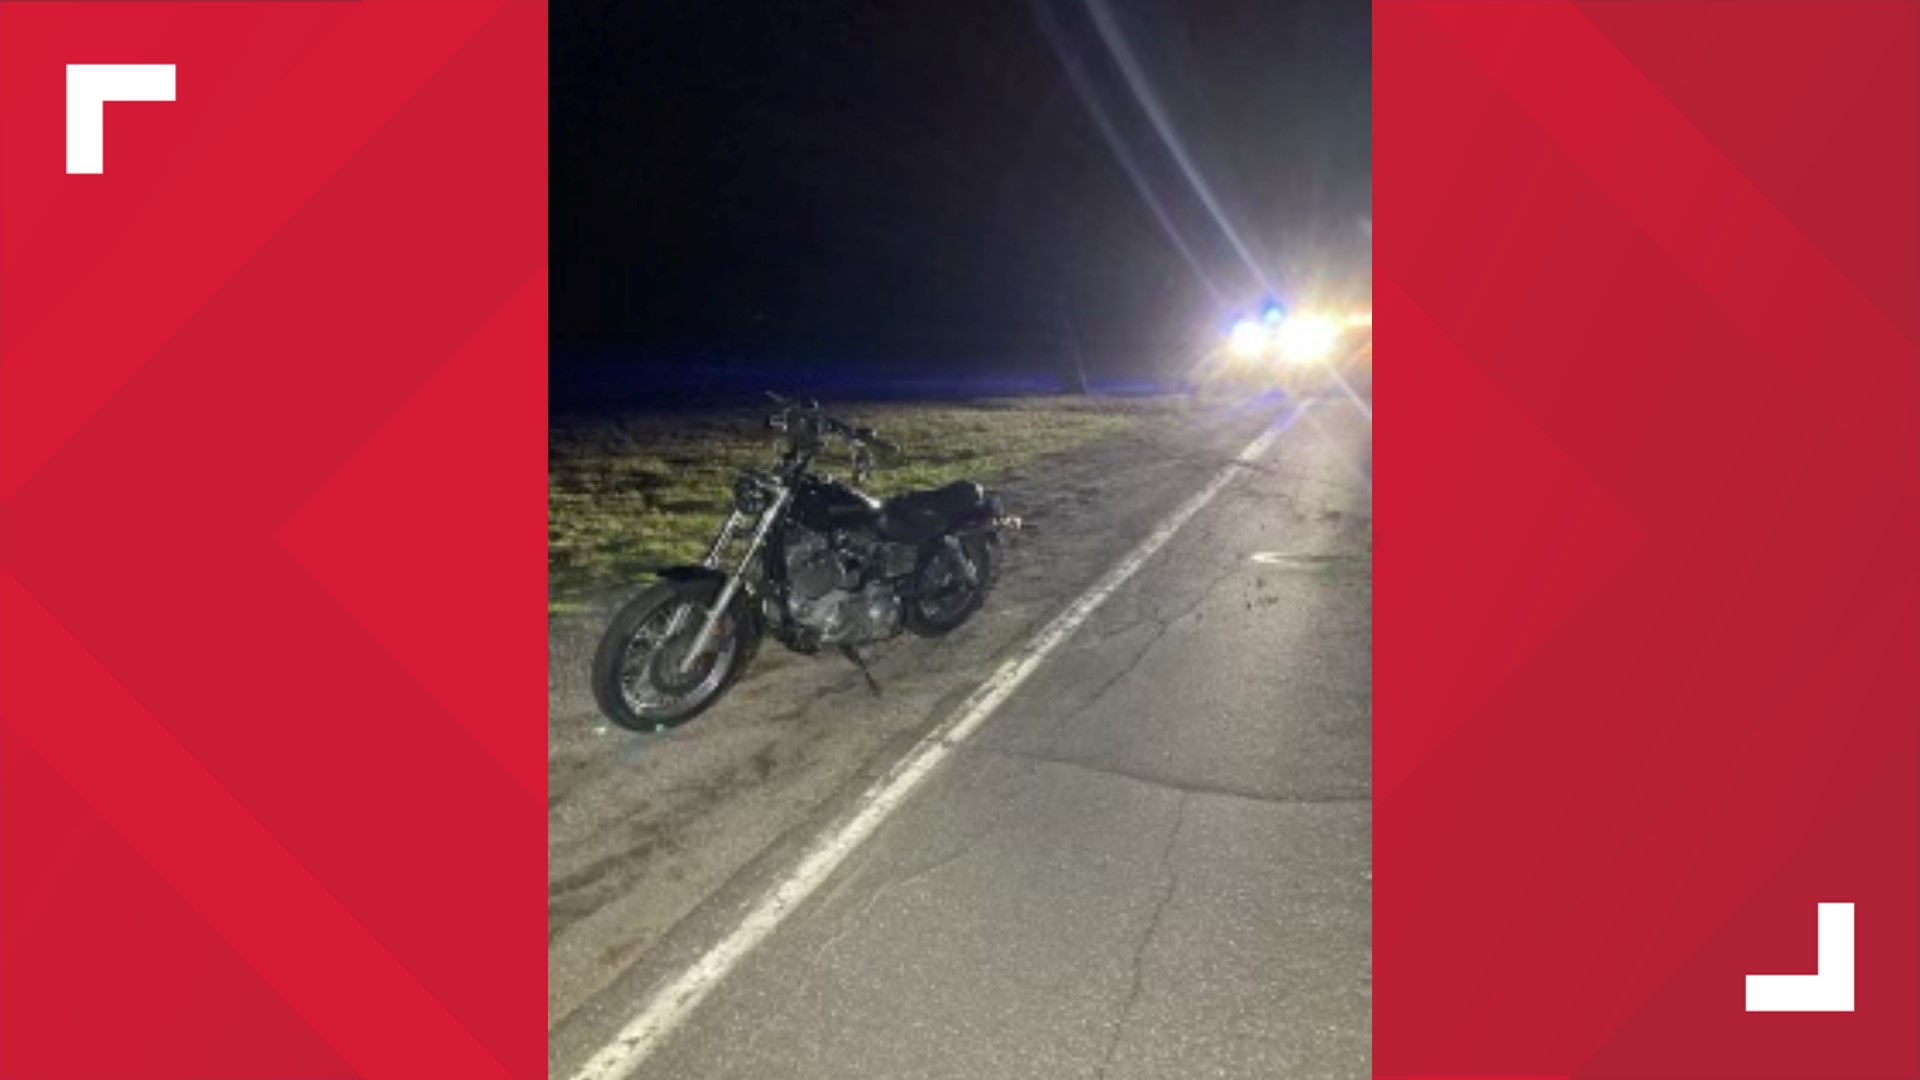 The Oxford County Sheriff's Office said the crash happened around 9:20 p.m. on Route 120 when a moose entered the roadway.